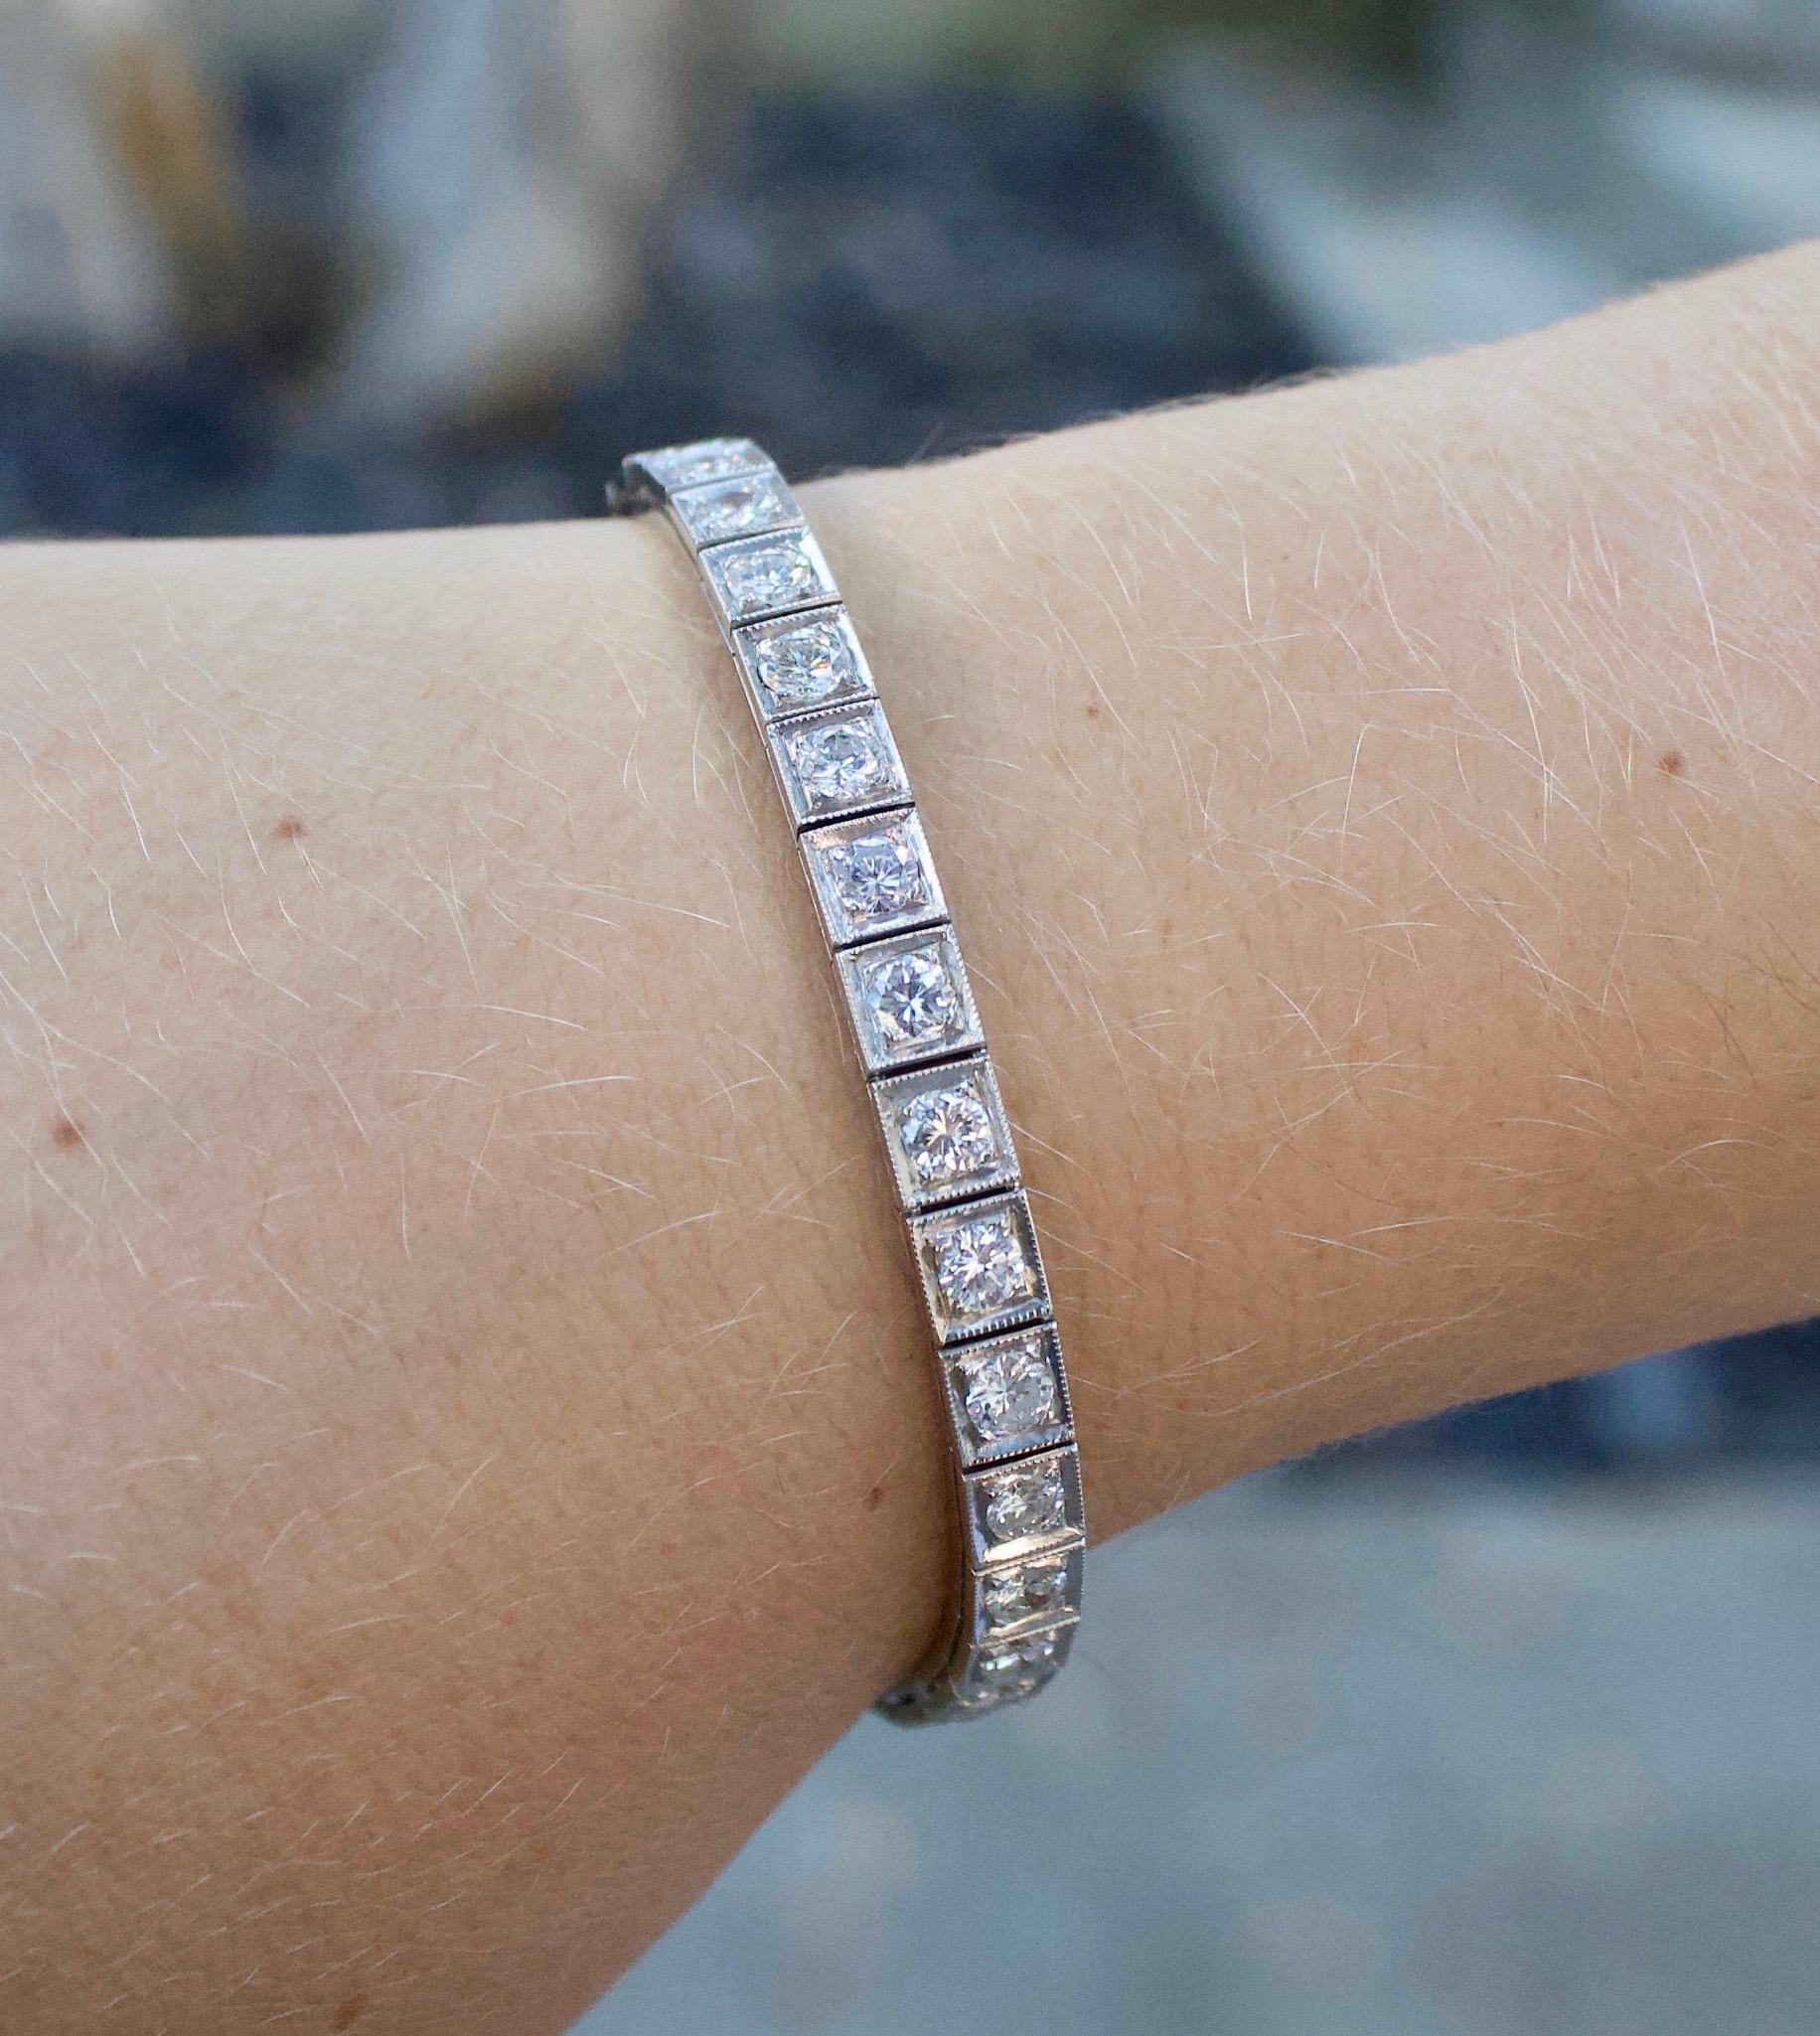 Circa 1940's Diamond Tennis Bracelet in White Gold 6.50 Carats
The Classic
Thirty Two Round Brilliant Cut Diamonds Weighing 6.50 Carats Approximately Average Size .20 Carats [GHI - VS2- SI1]
[bright with no imperfections visible to the naked eye] 
7